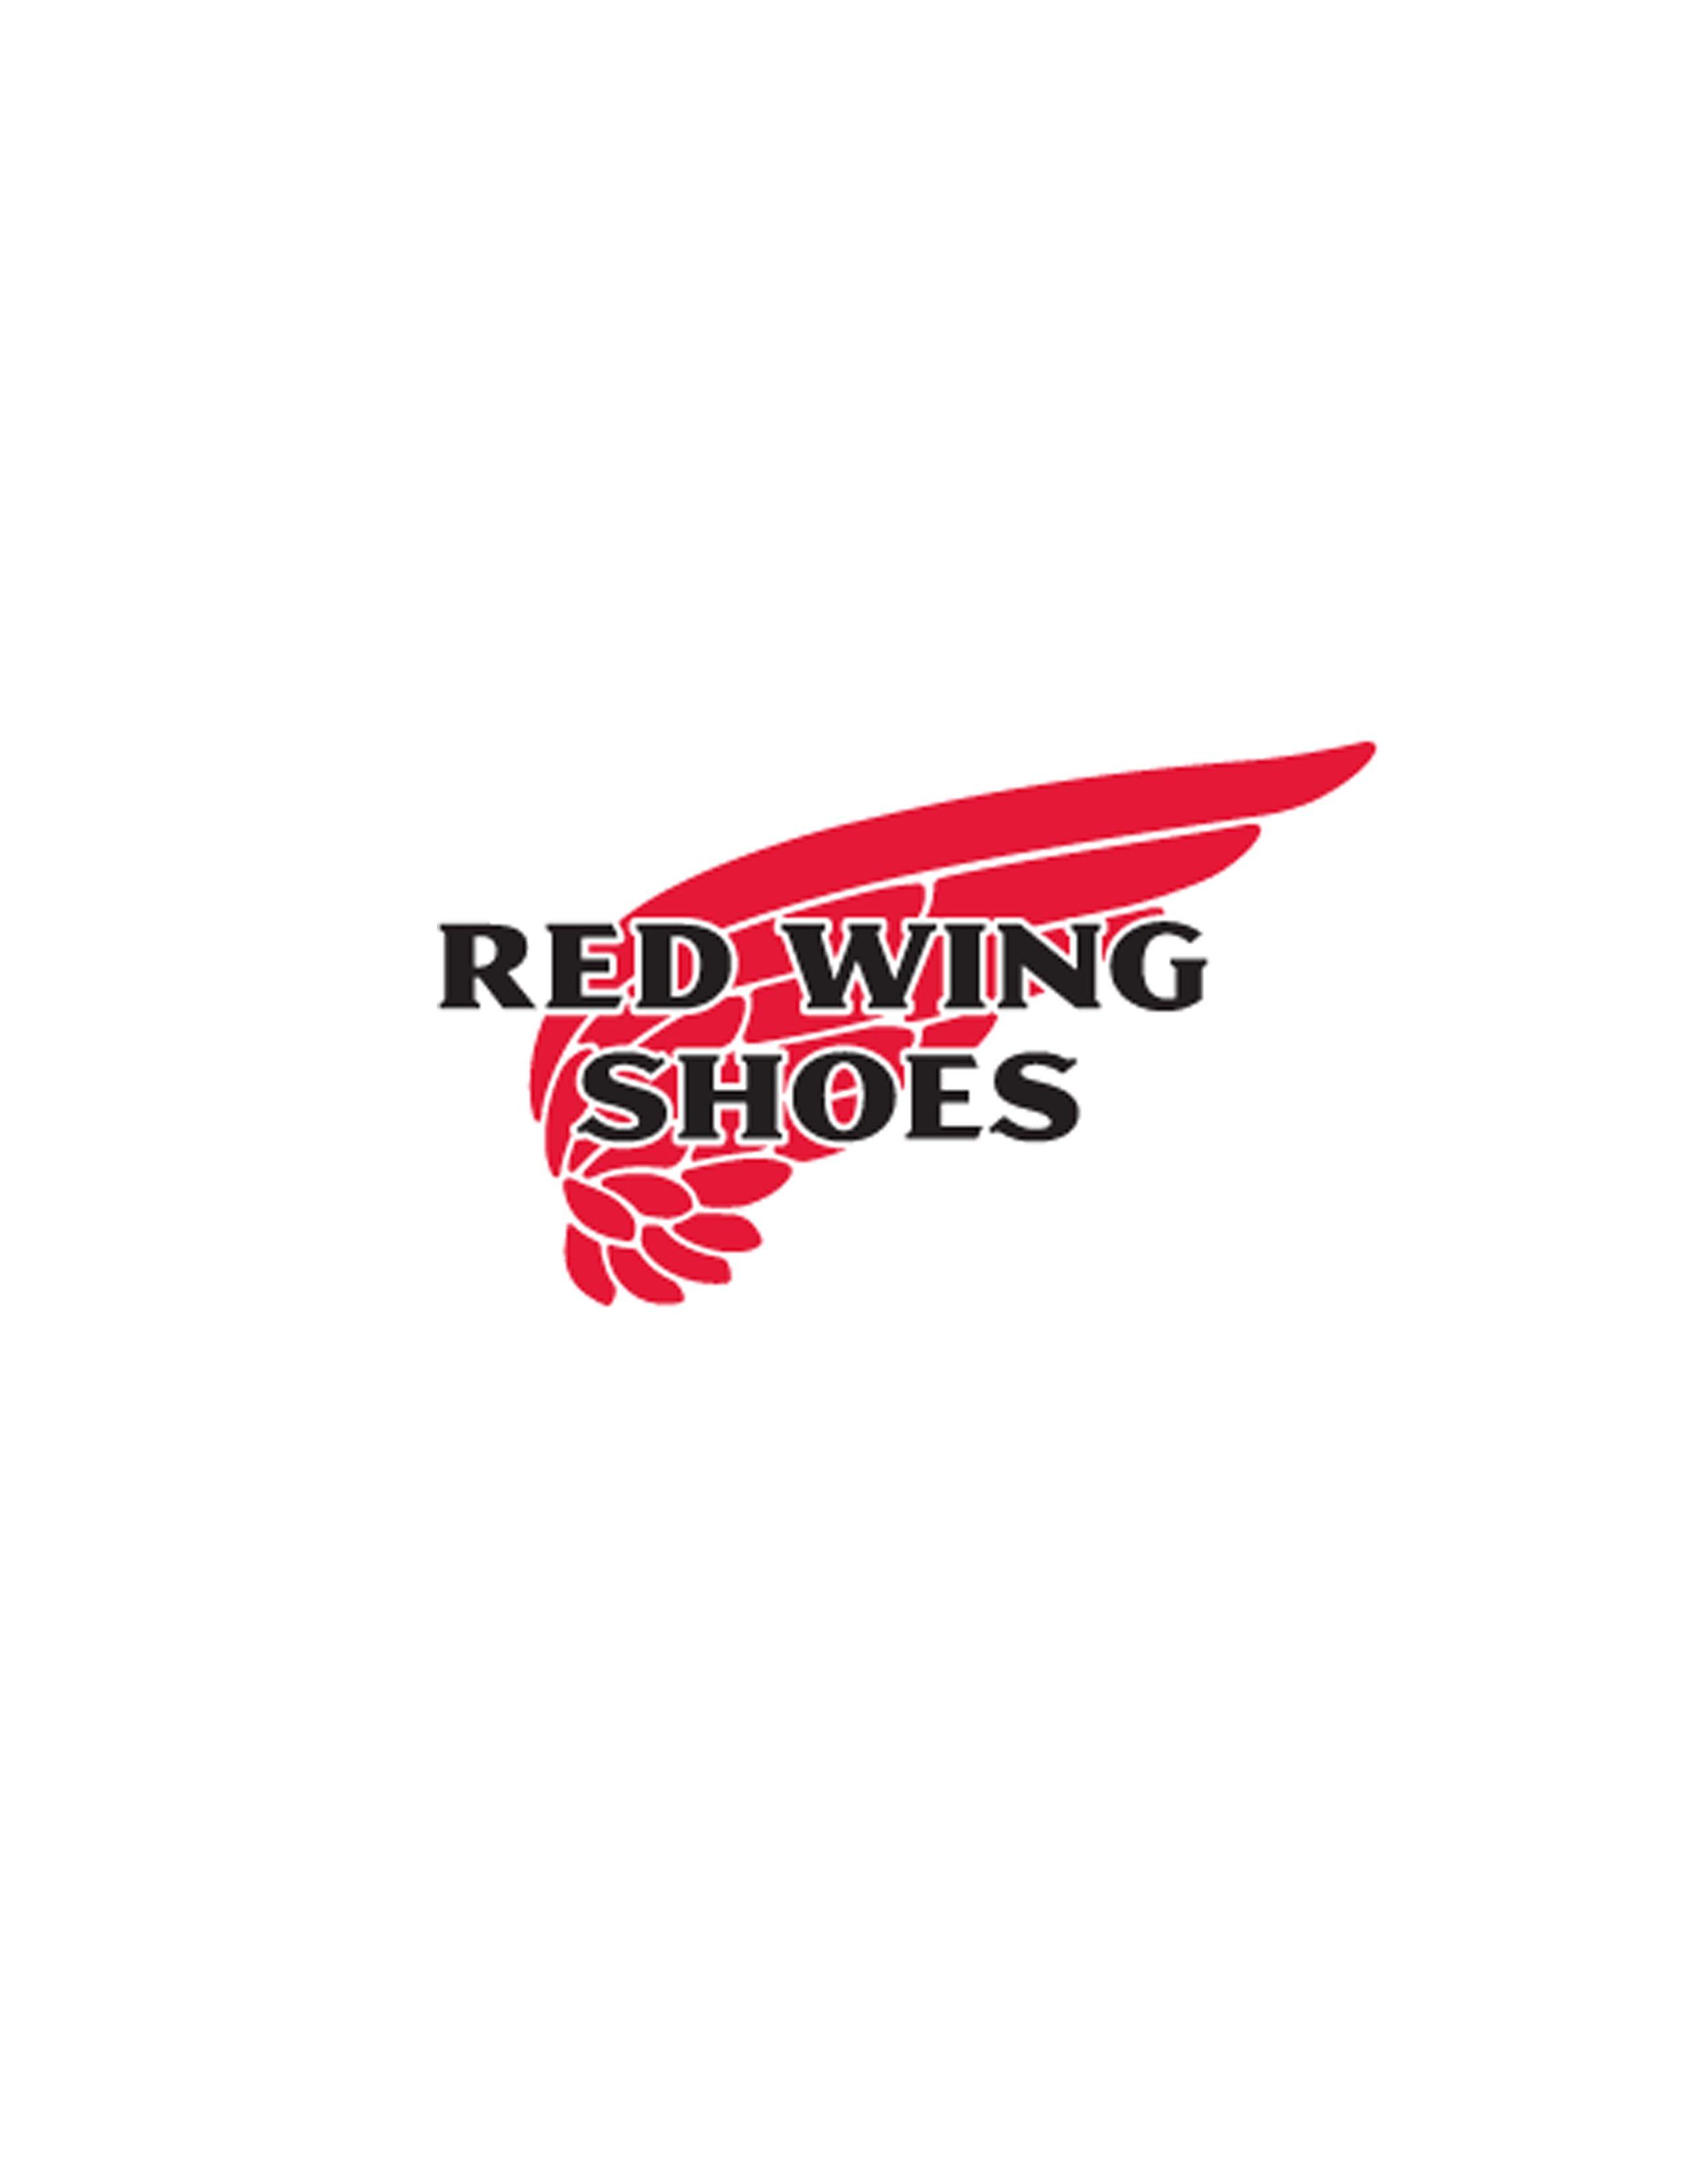 red wings boots logo